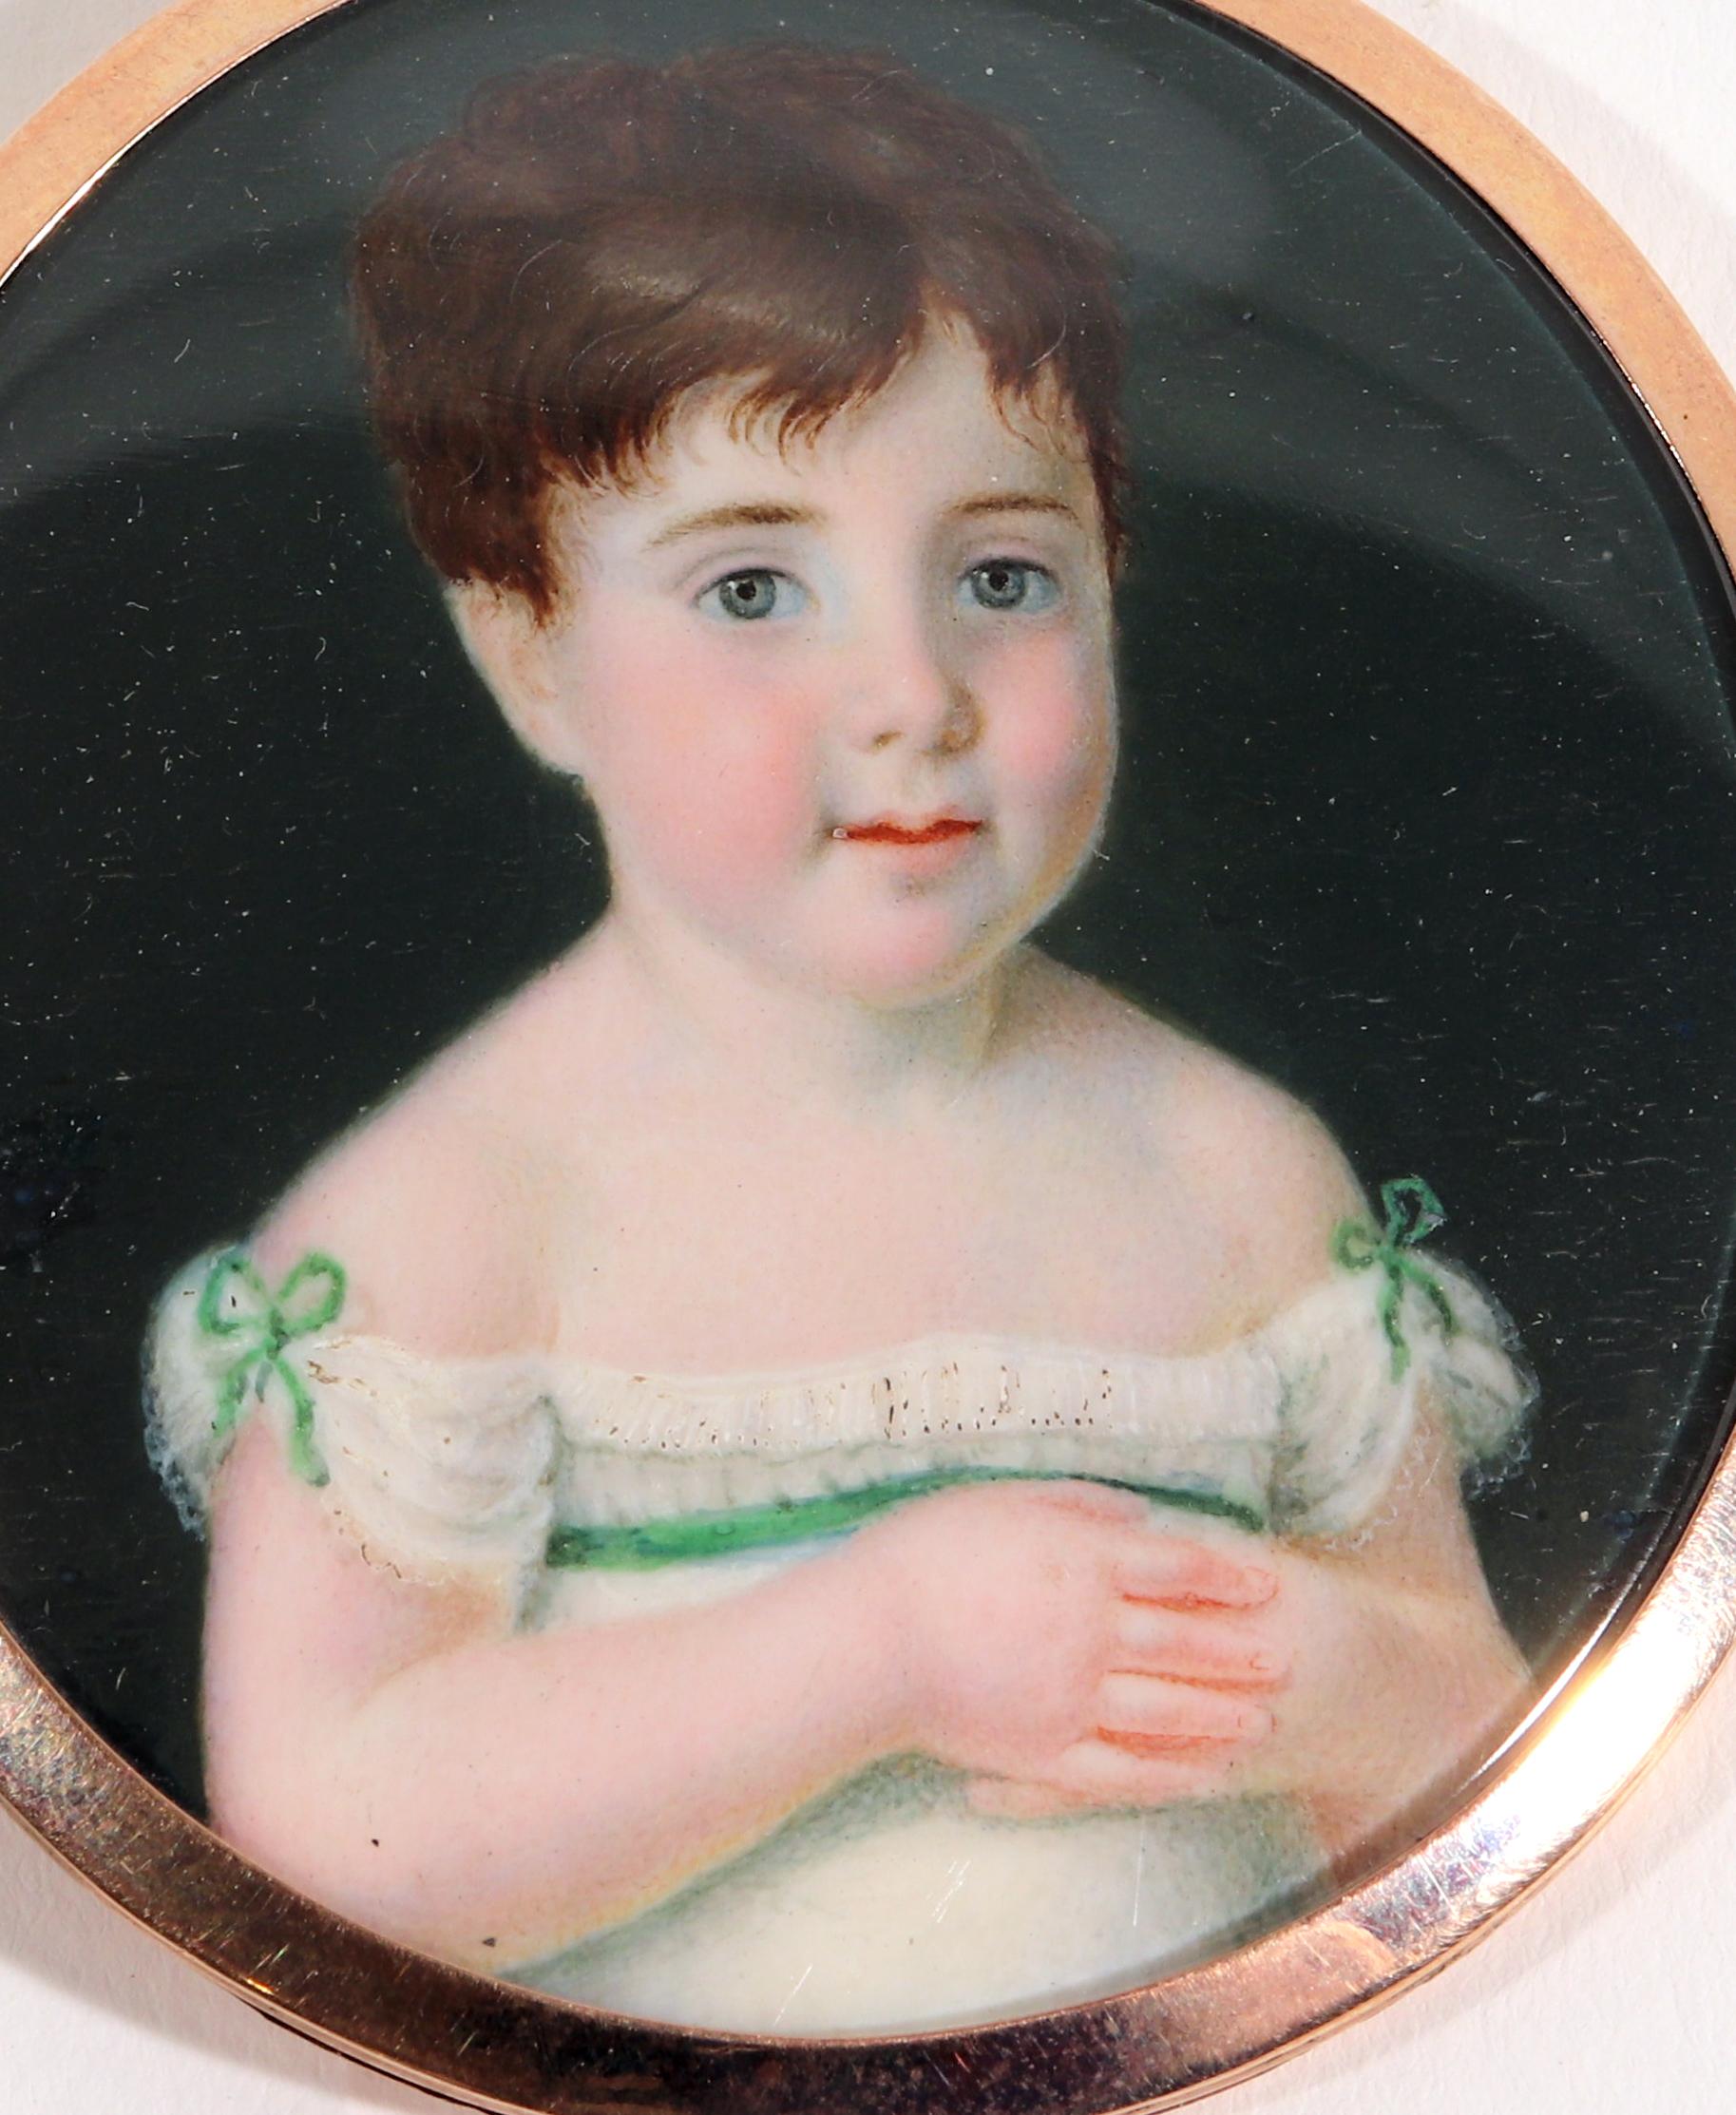 Portrait Miniature of a young girl, 
Signed Corno 1817

The large oval miniature within a gold frame and raised hanging loop depicts a young girl facing to the front left wearing an off-the-shoulder white dress with a green sash across the chest